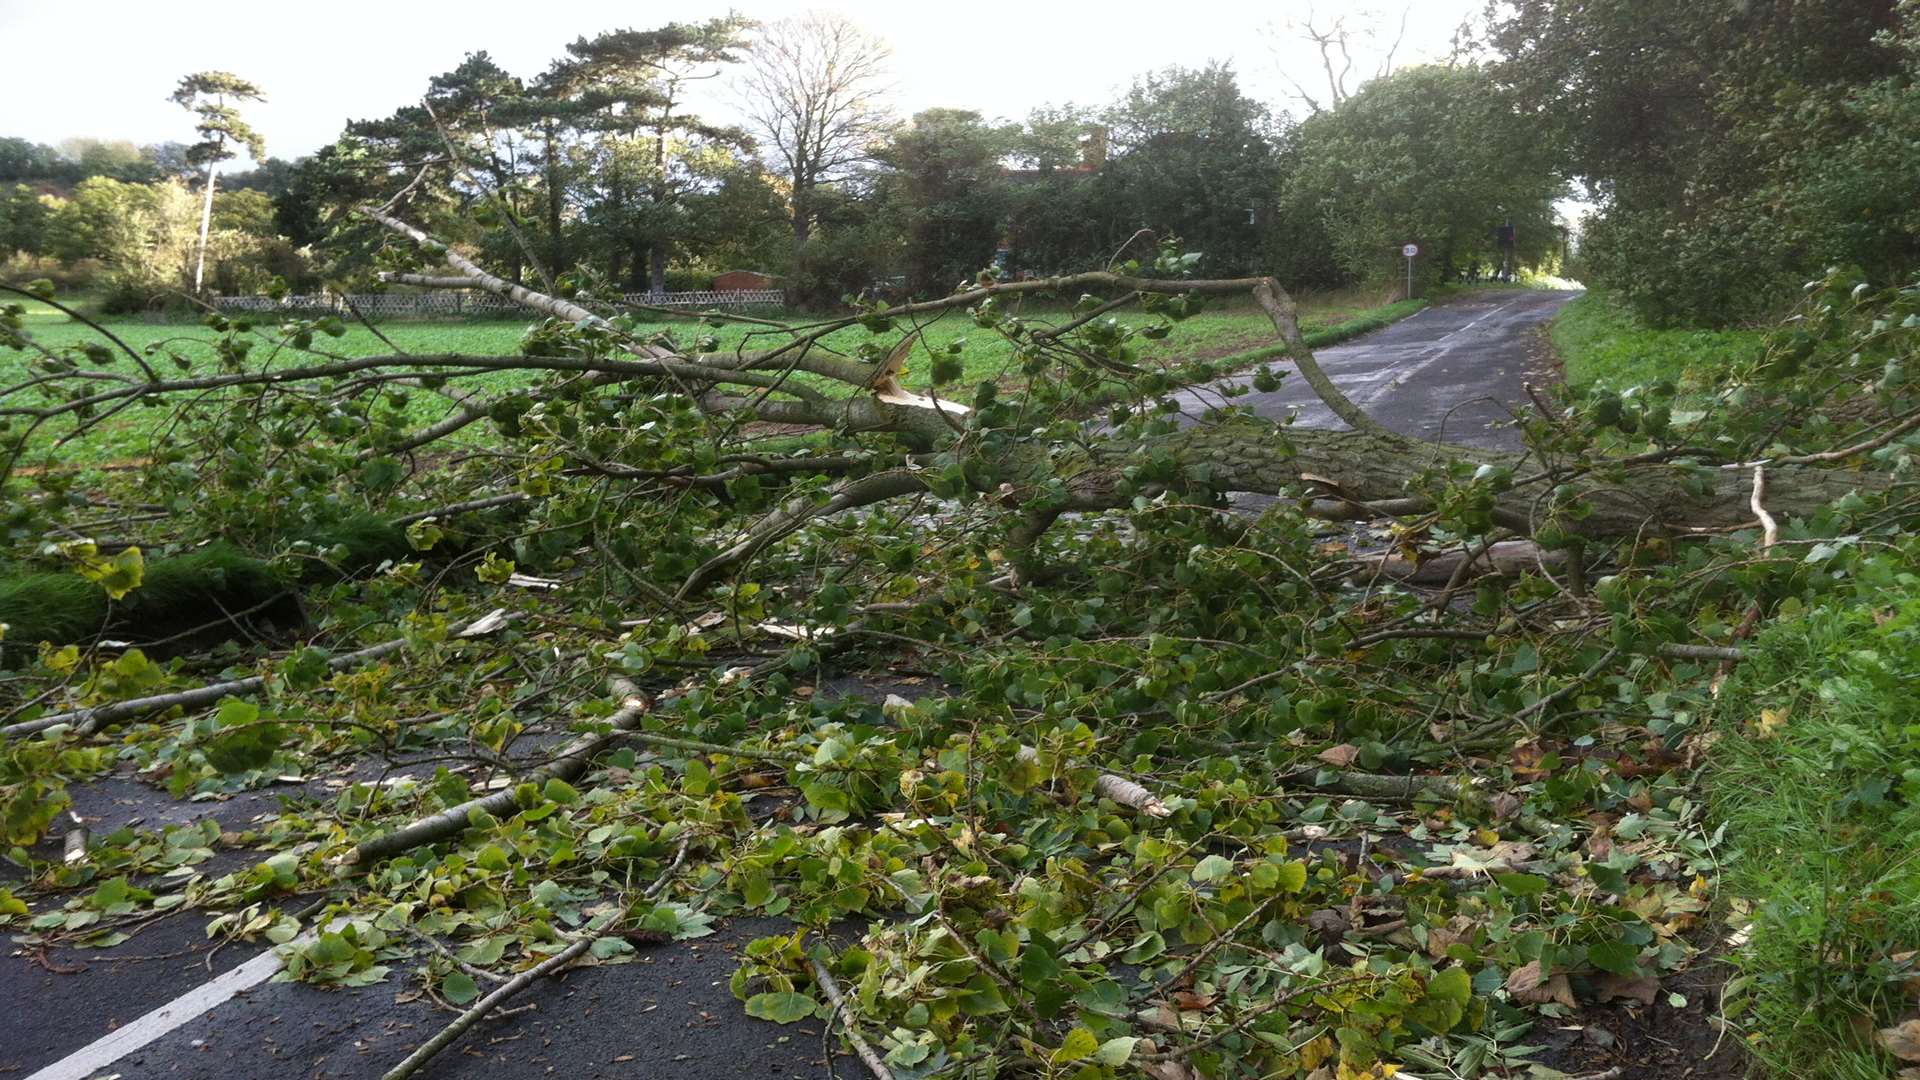 A road to Upnor village in Medway is blocked by trees